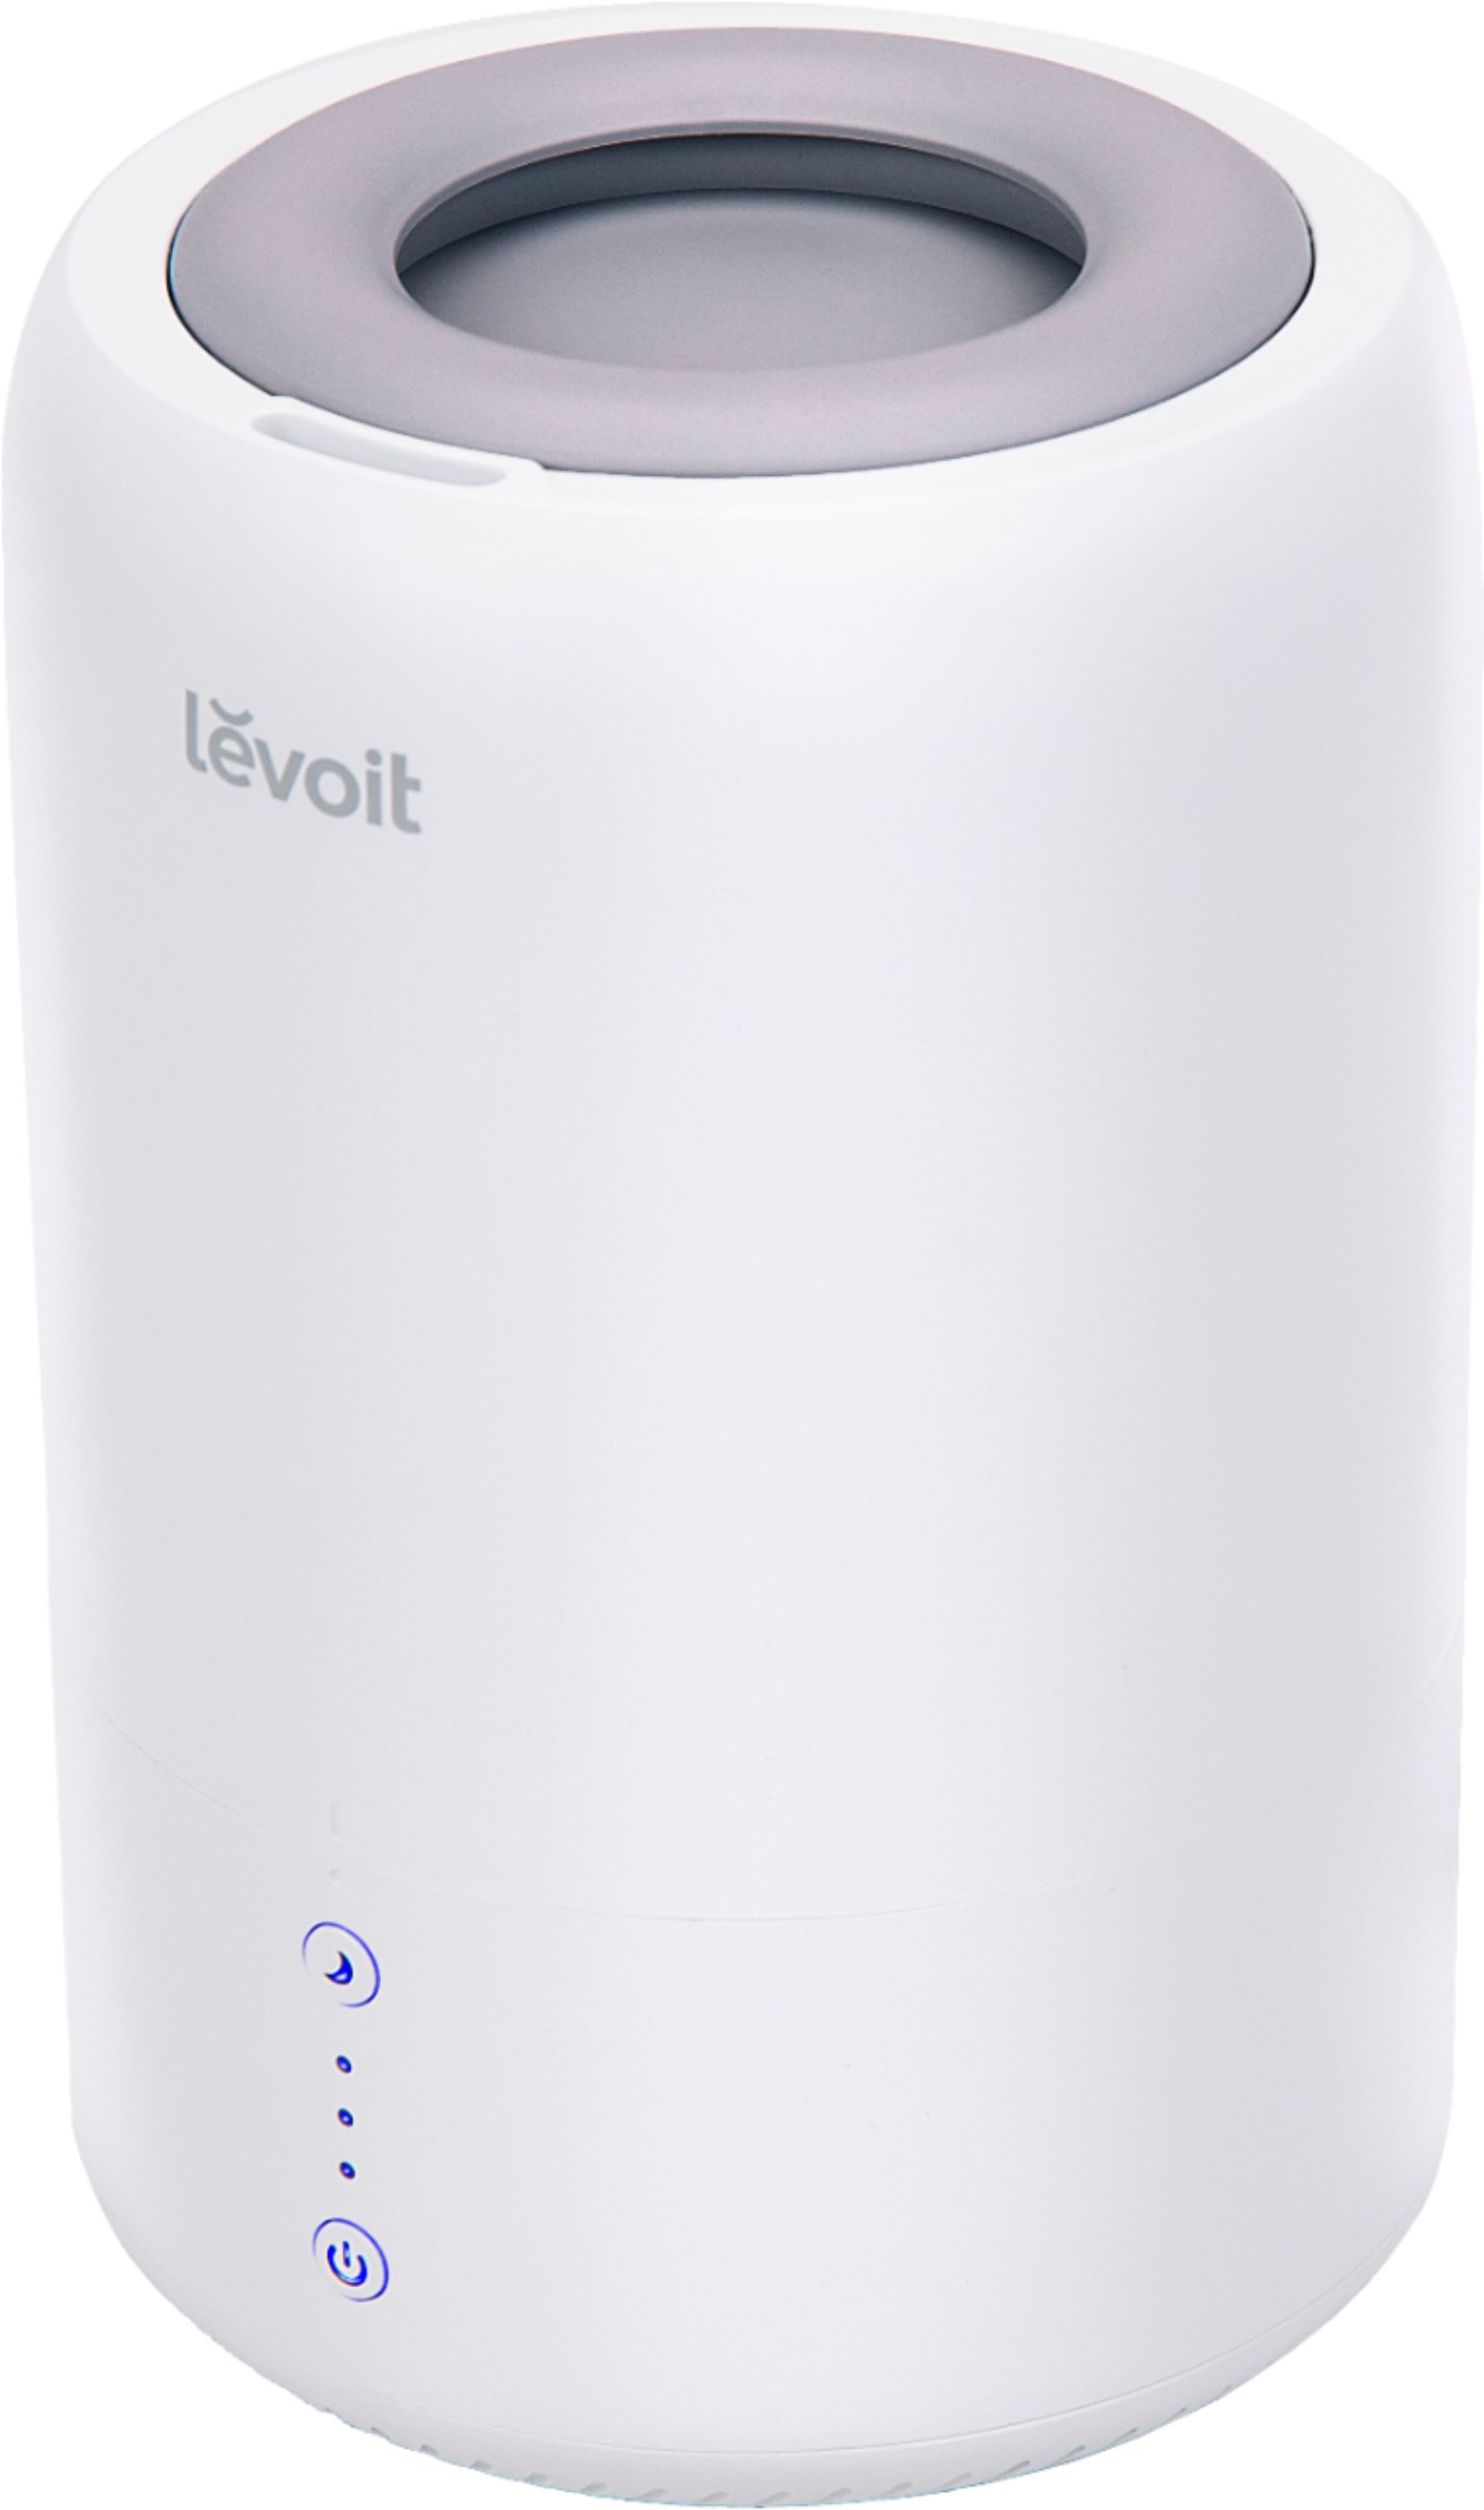 Angle View: Levoit - Ultrasonic Top-Fill Cool Mist 2-in-1 0.5 Gal Humidifier & Diffuser - White